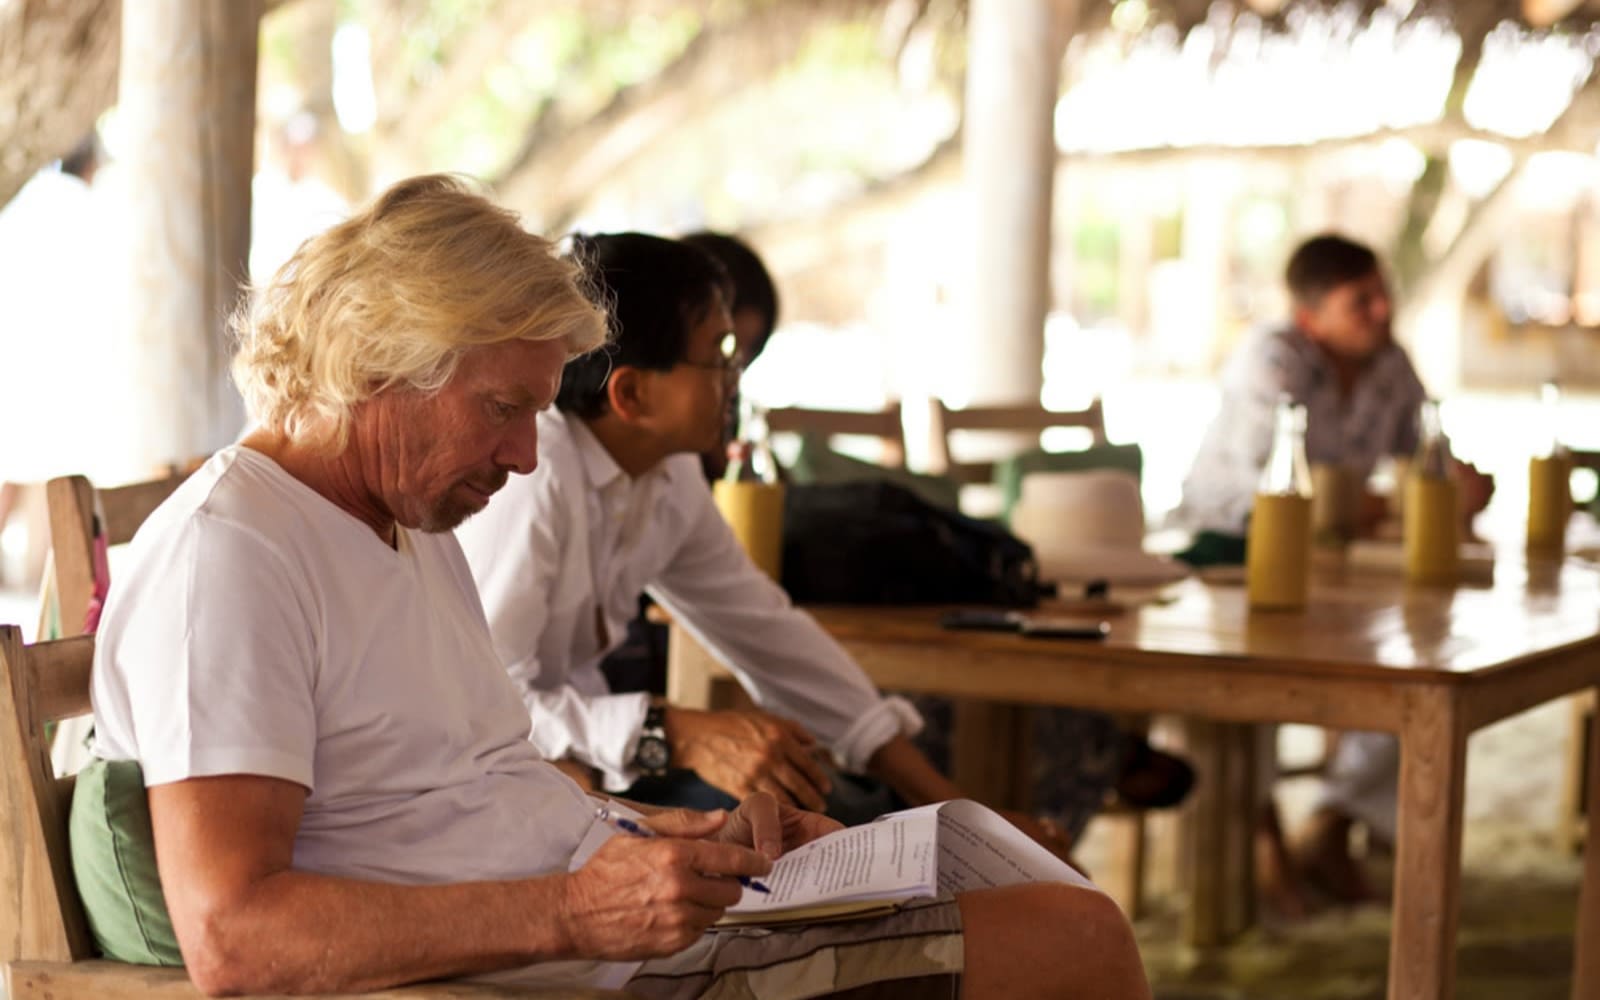 Richard Branson sitting in a chair writing, with people in the background